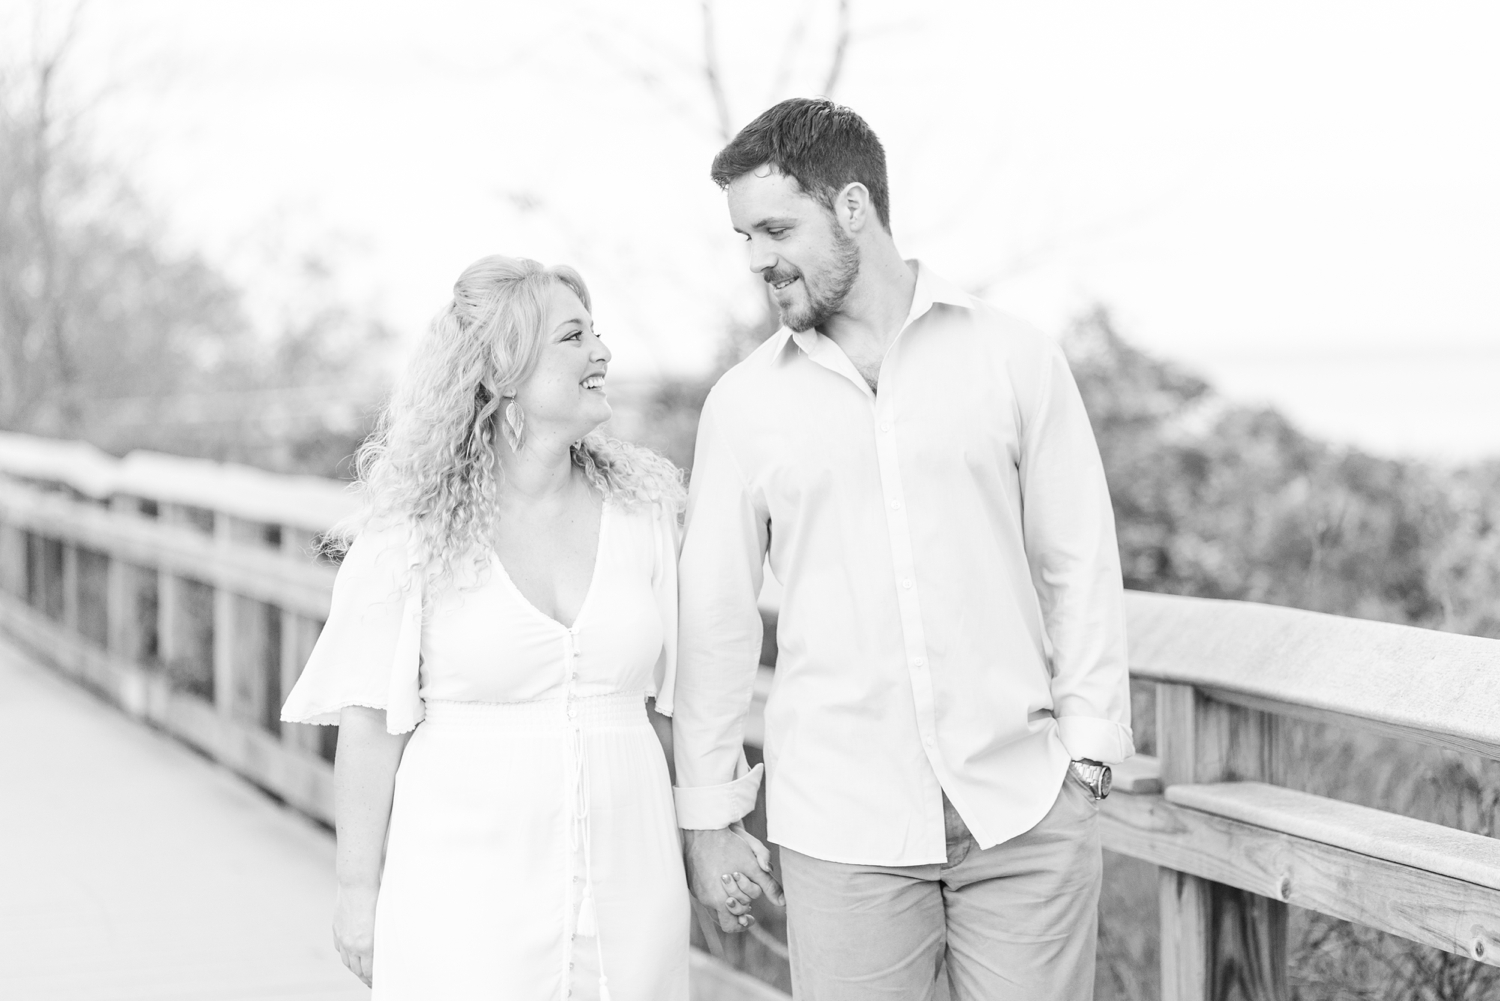 Walnut Beach Engagement Session in Milford, CT | Vicki & Kevin ...